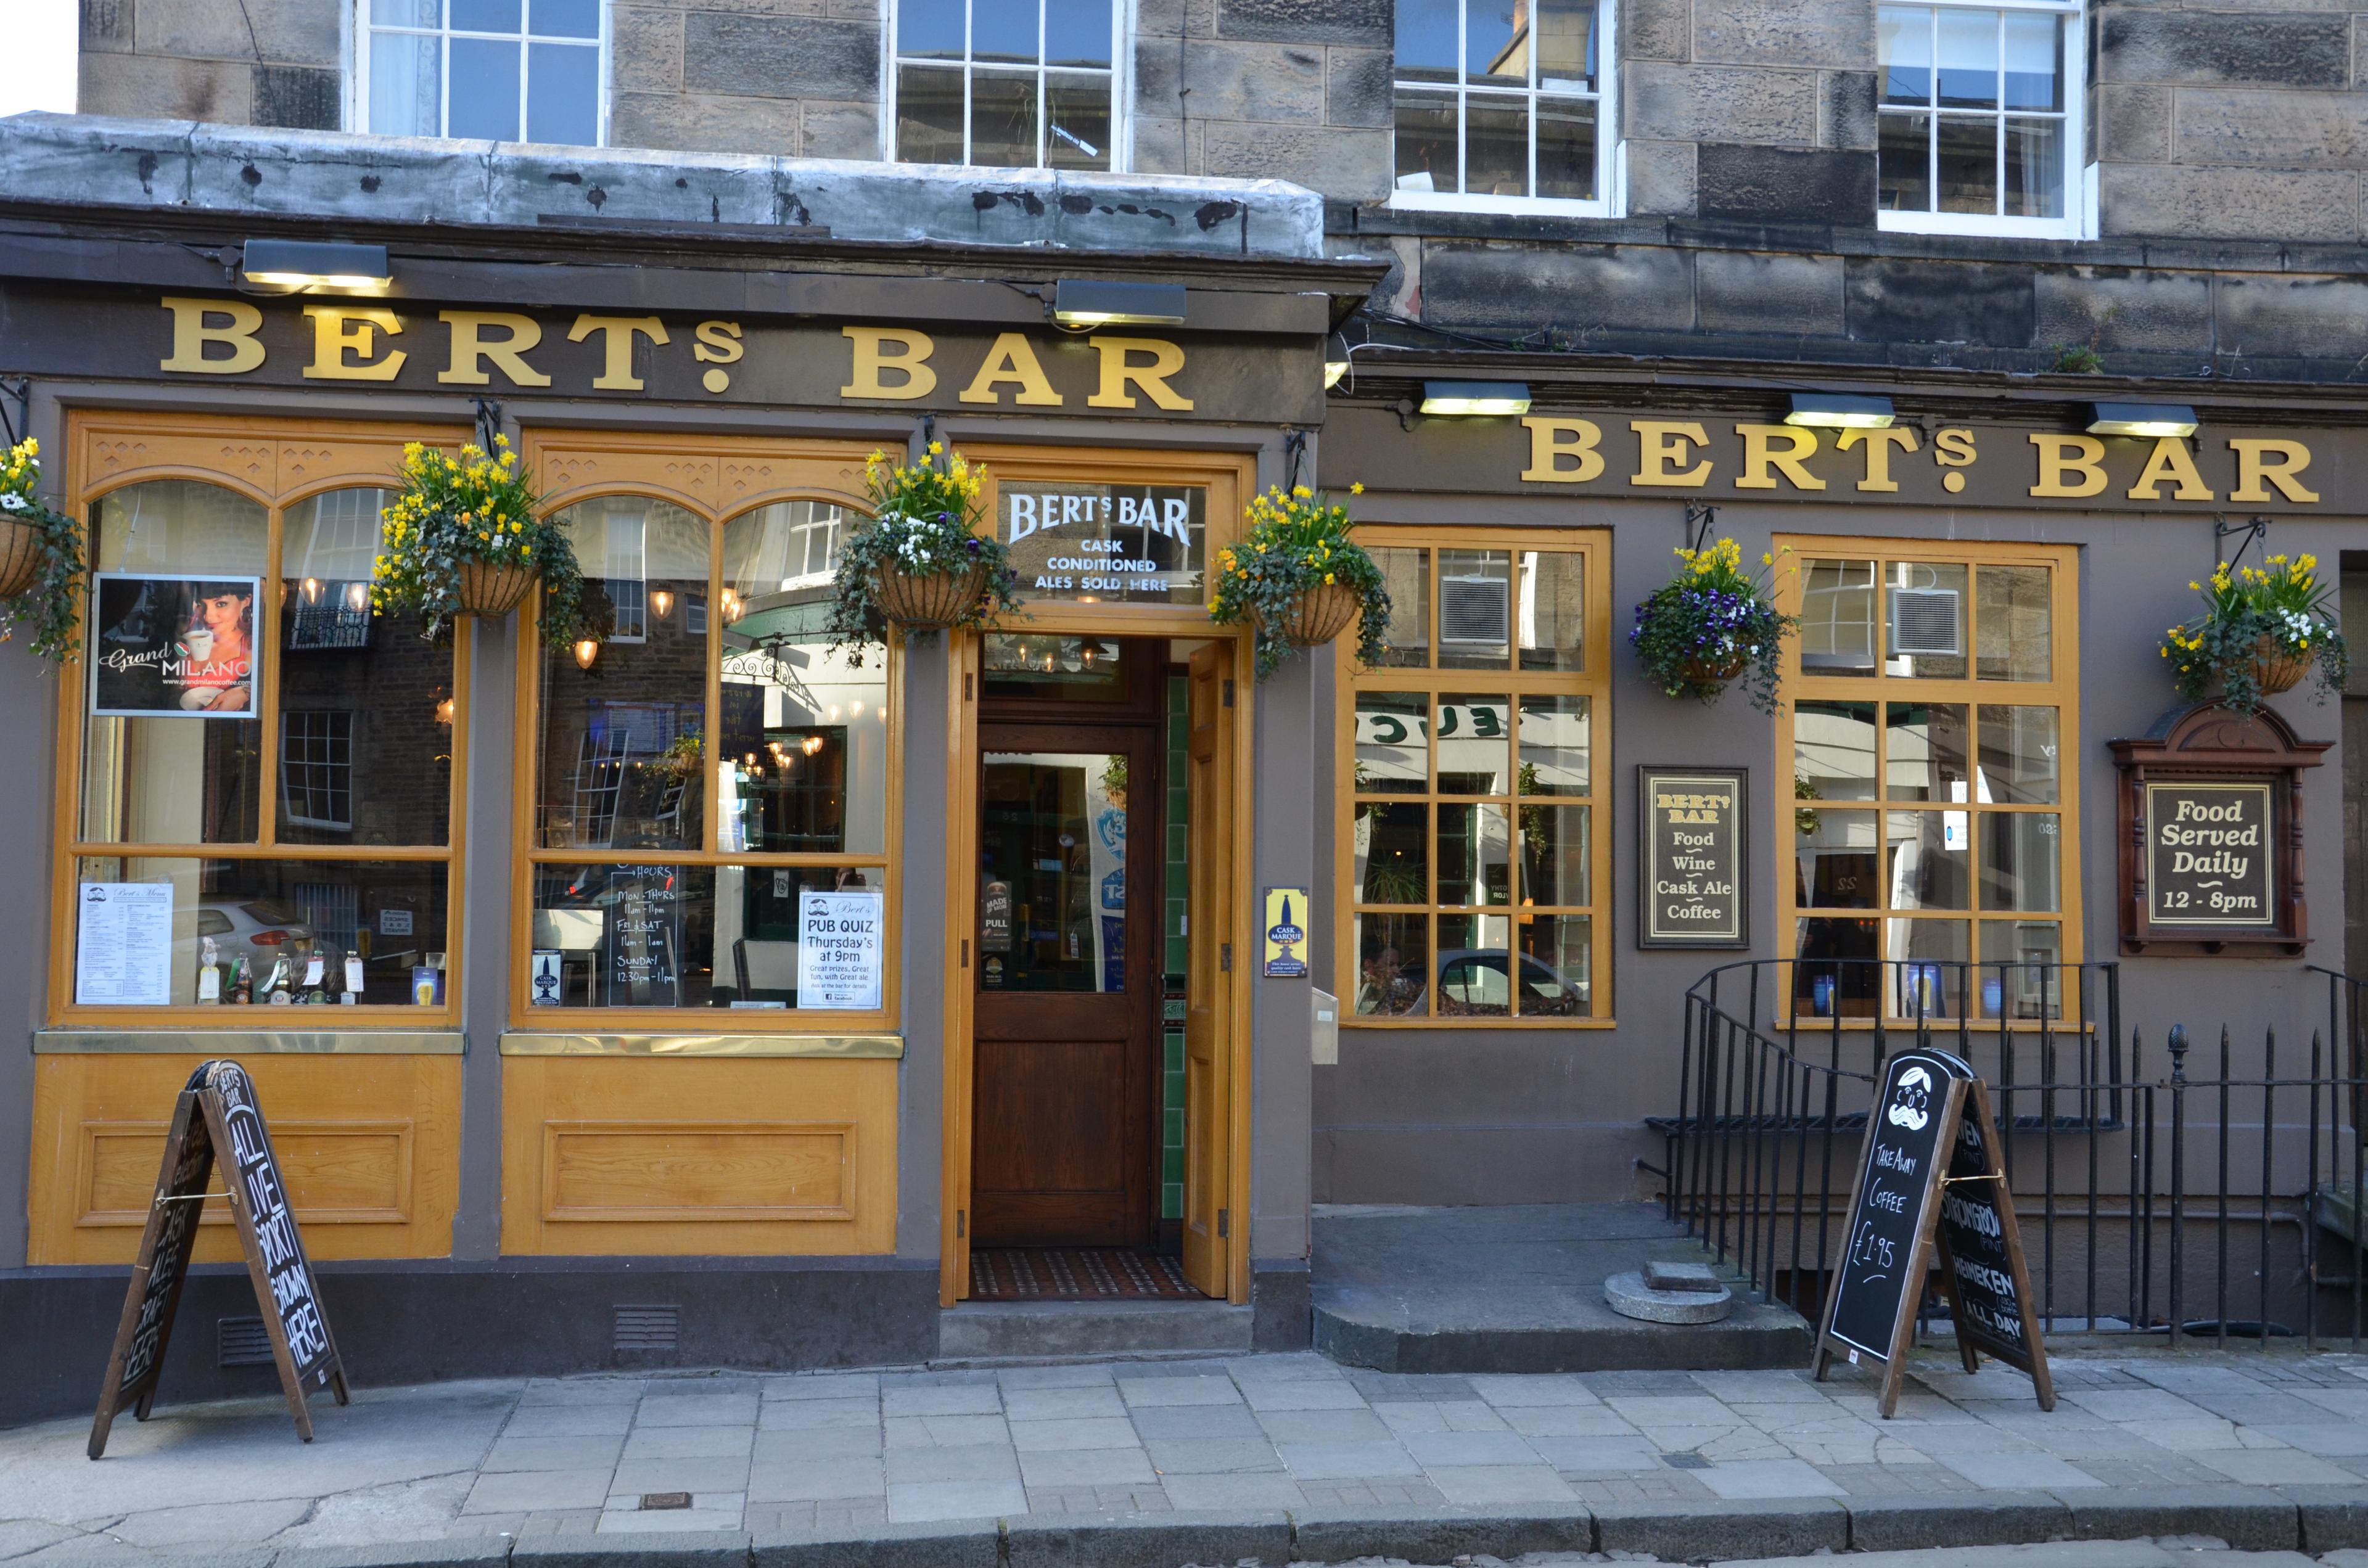 Cover image of this place Bert's Bar